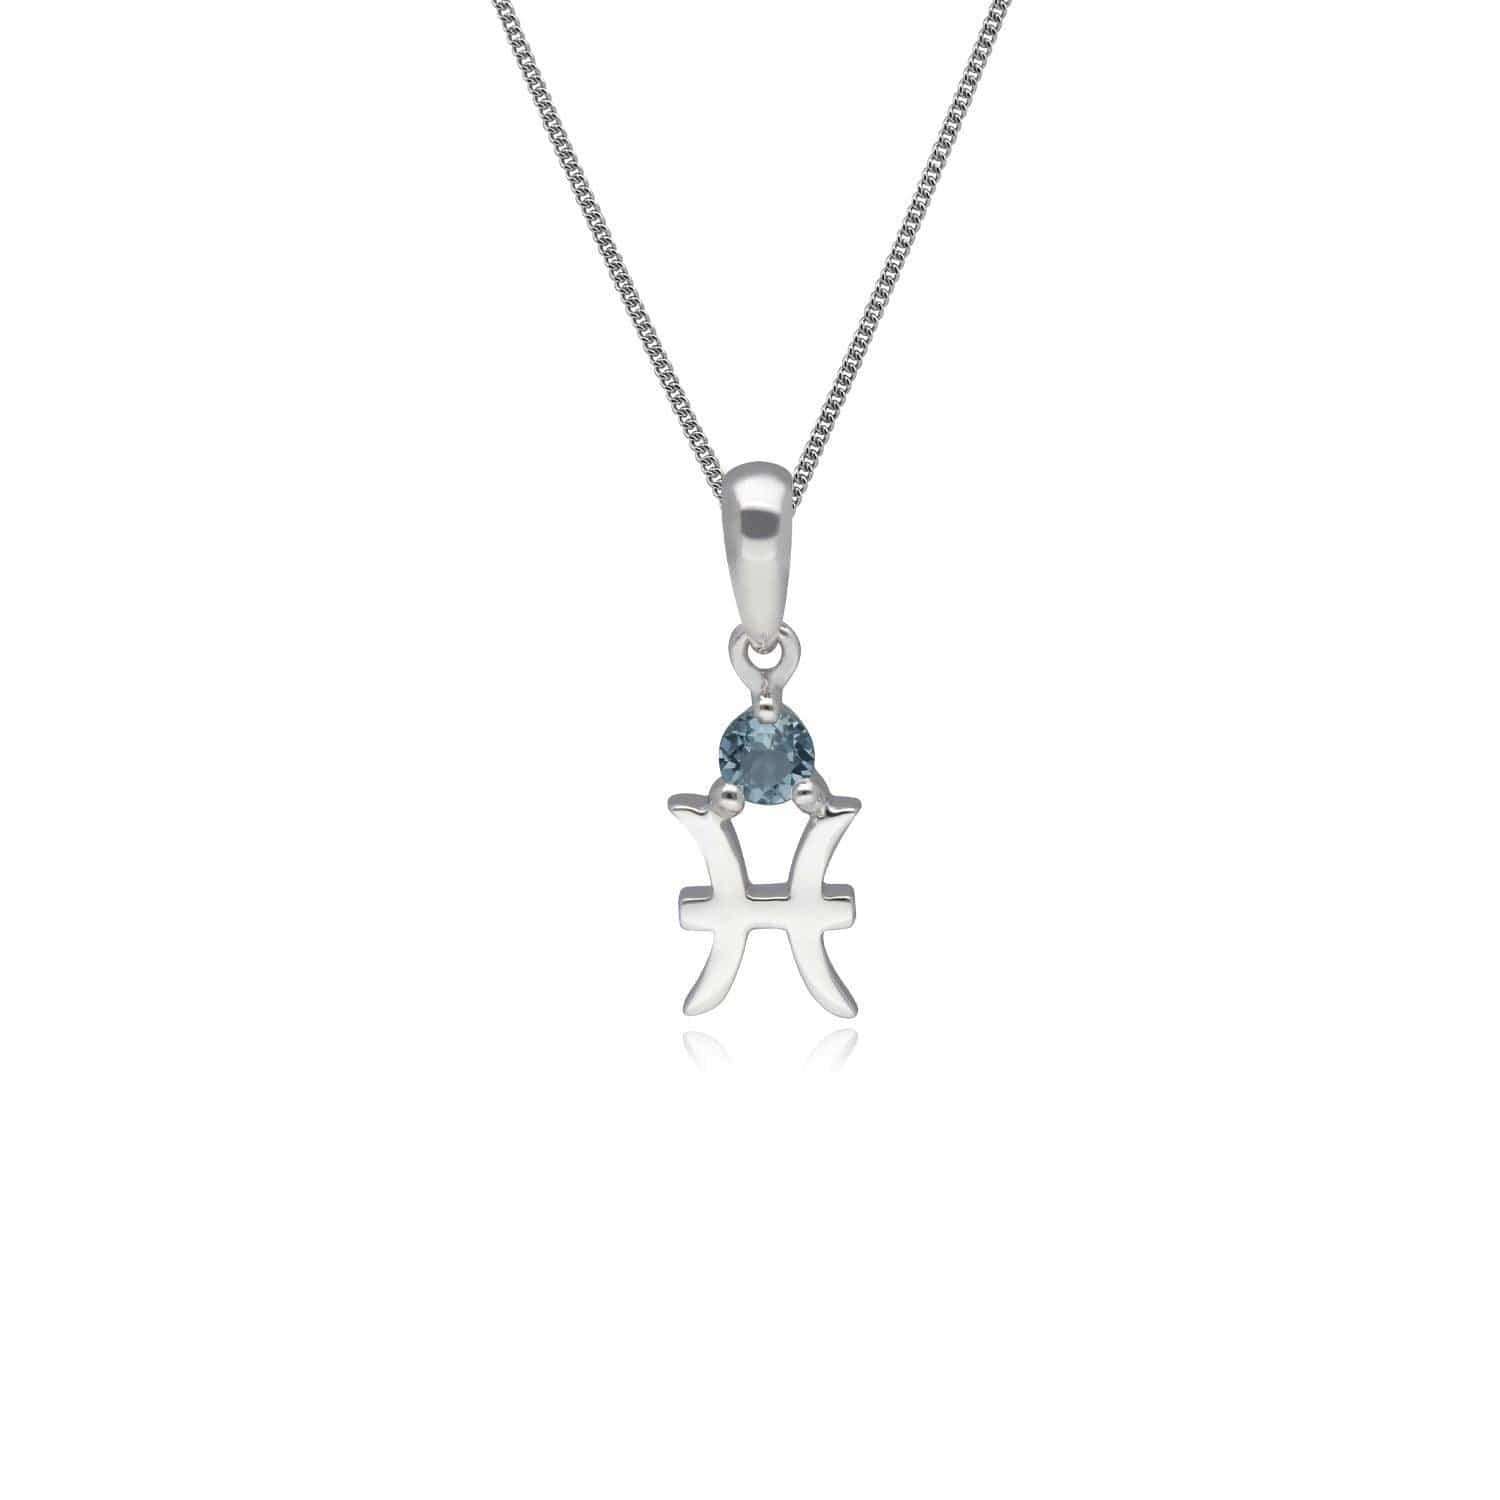 Image of Aquamarine Pisces Zodiac Charm Necklace in 9ct White Gold